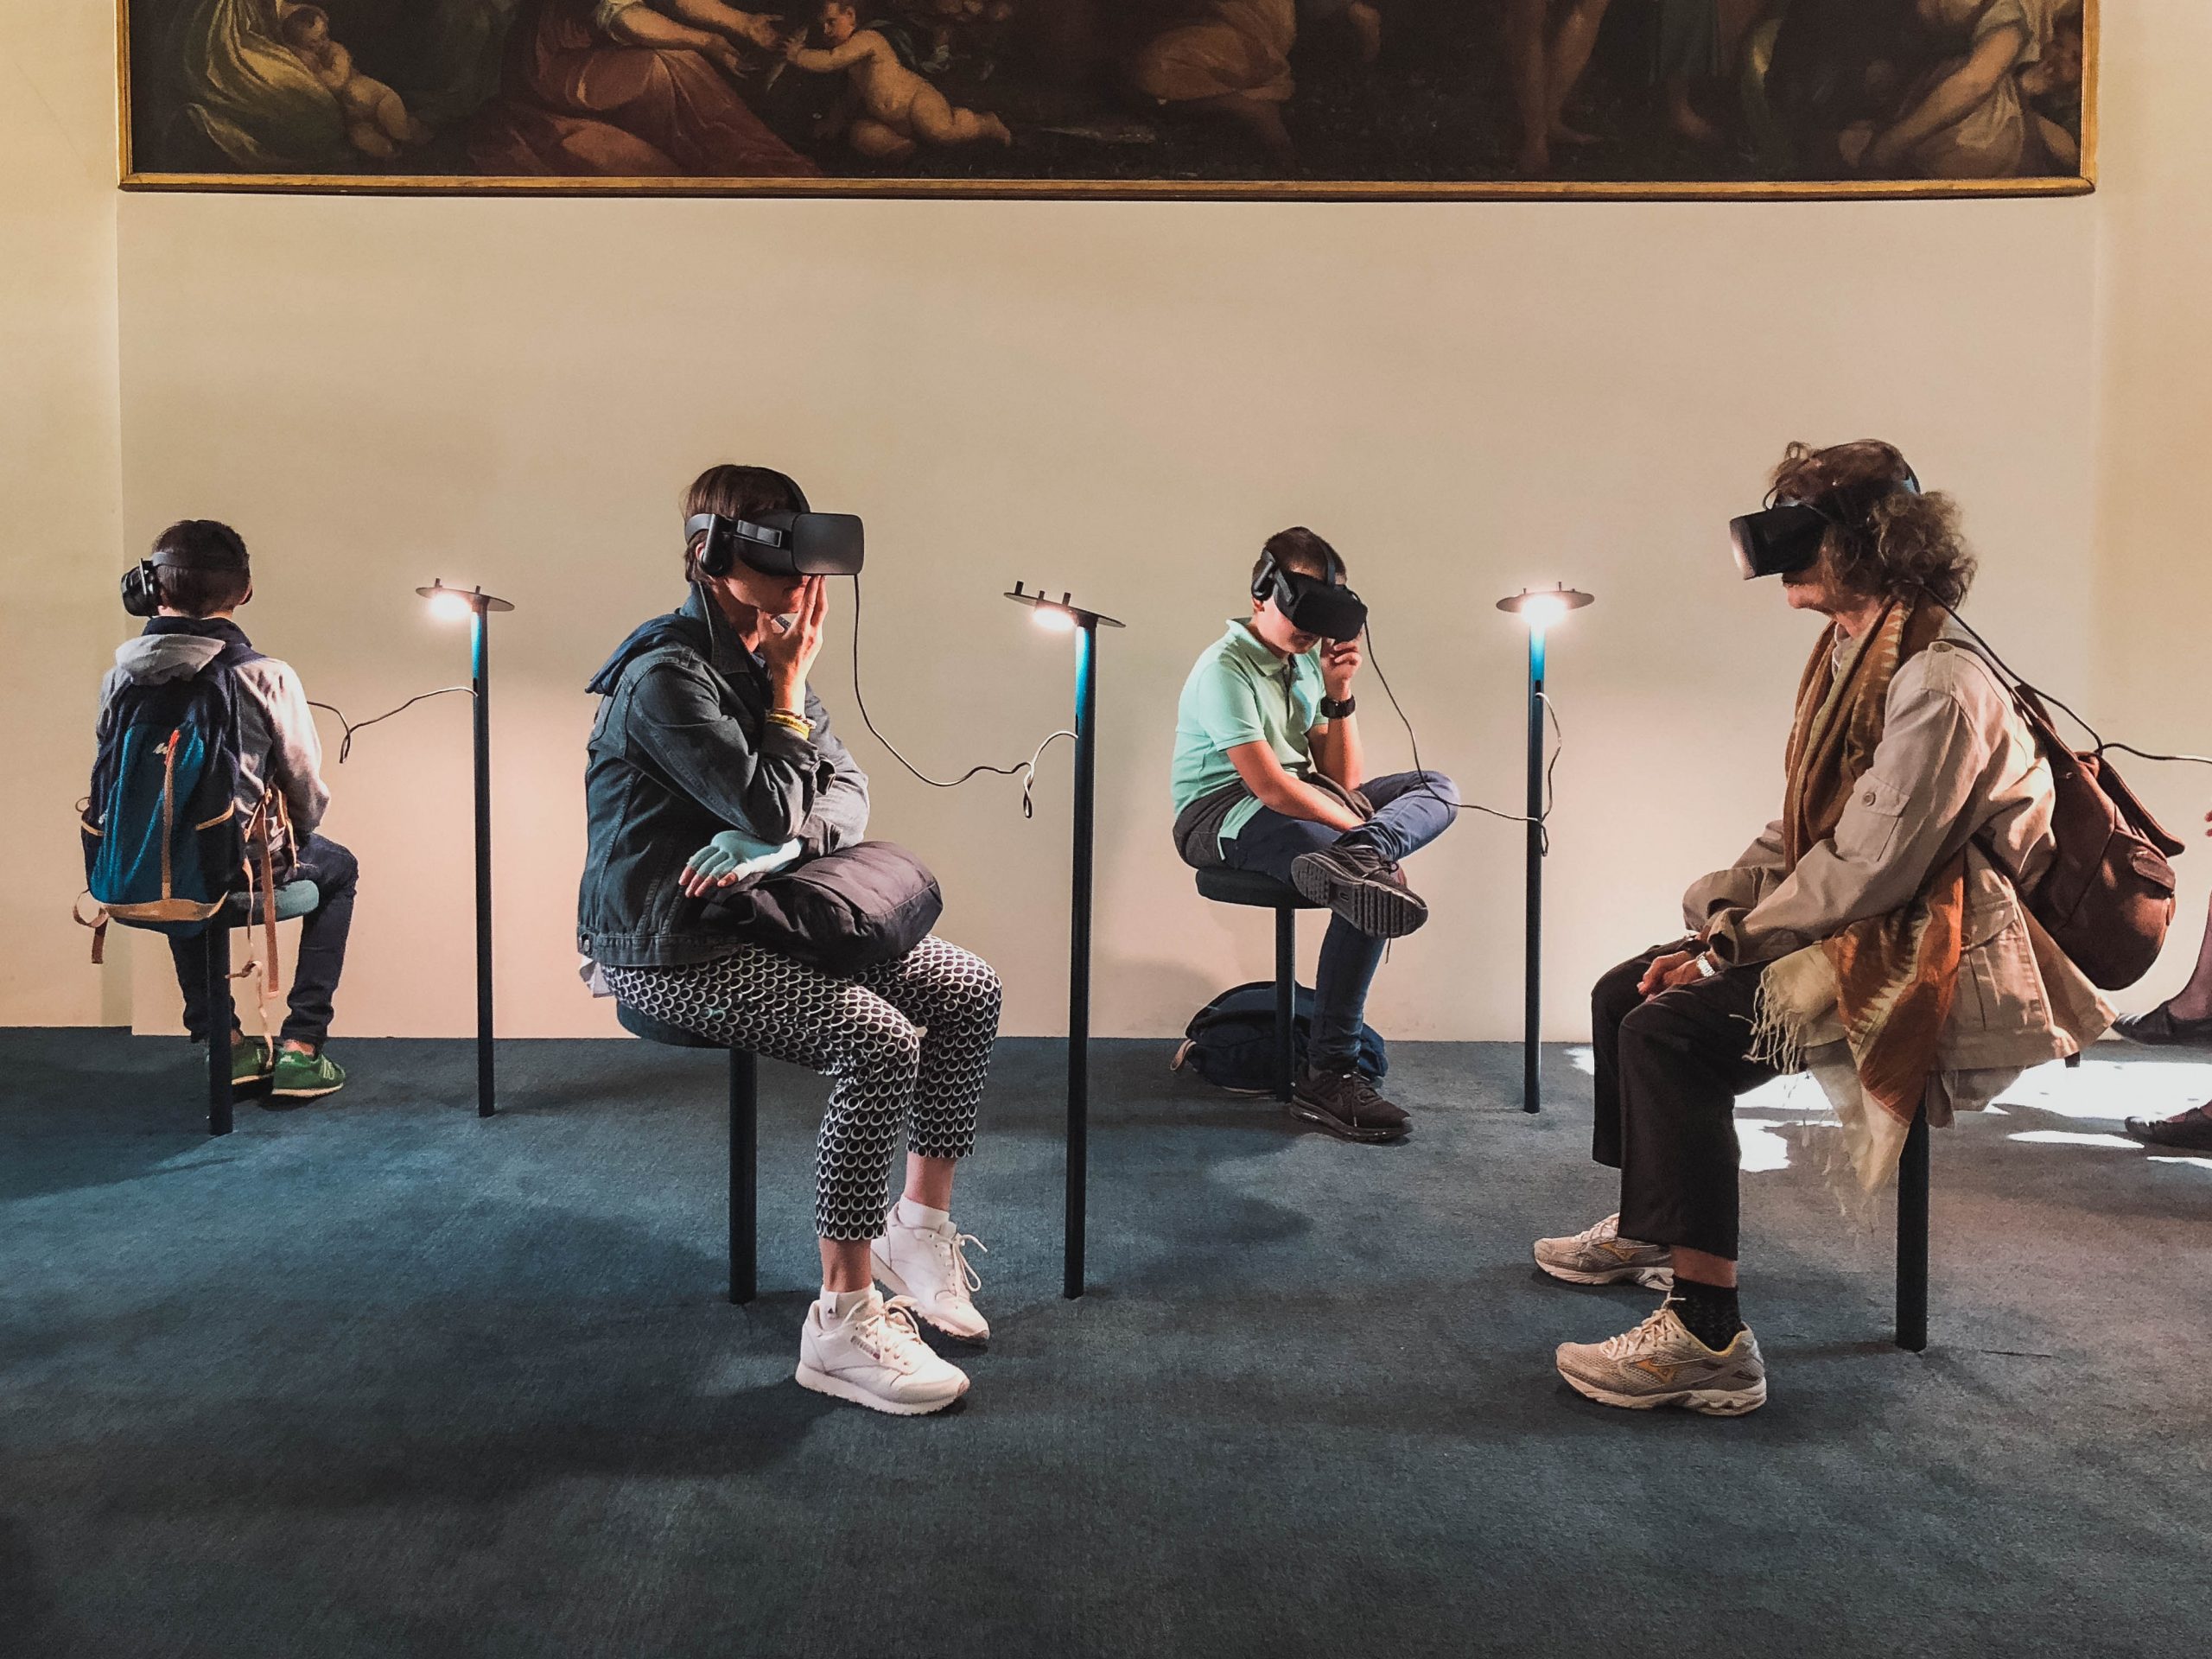 People in a museum exploring art with virtual reality headsets.